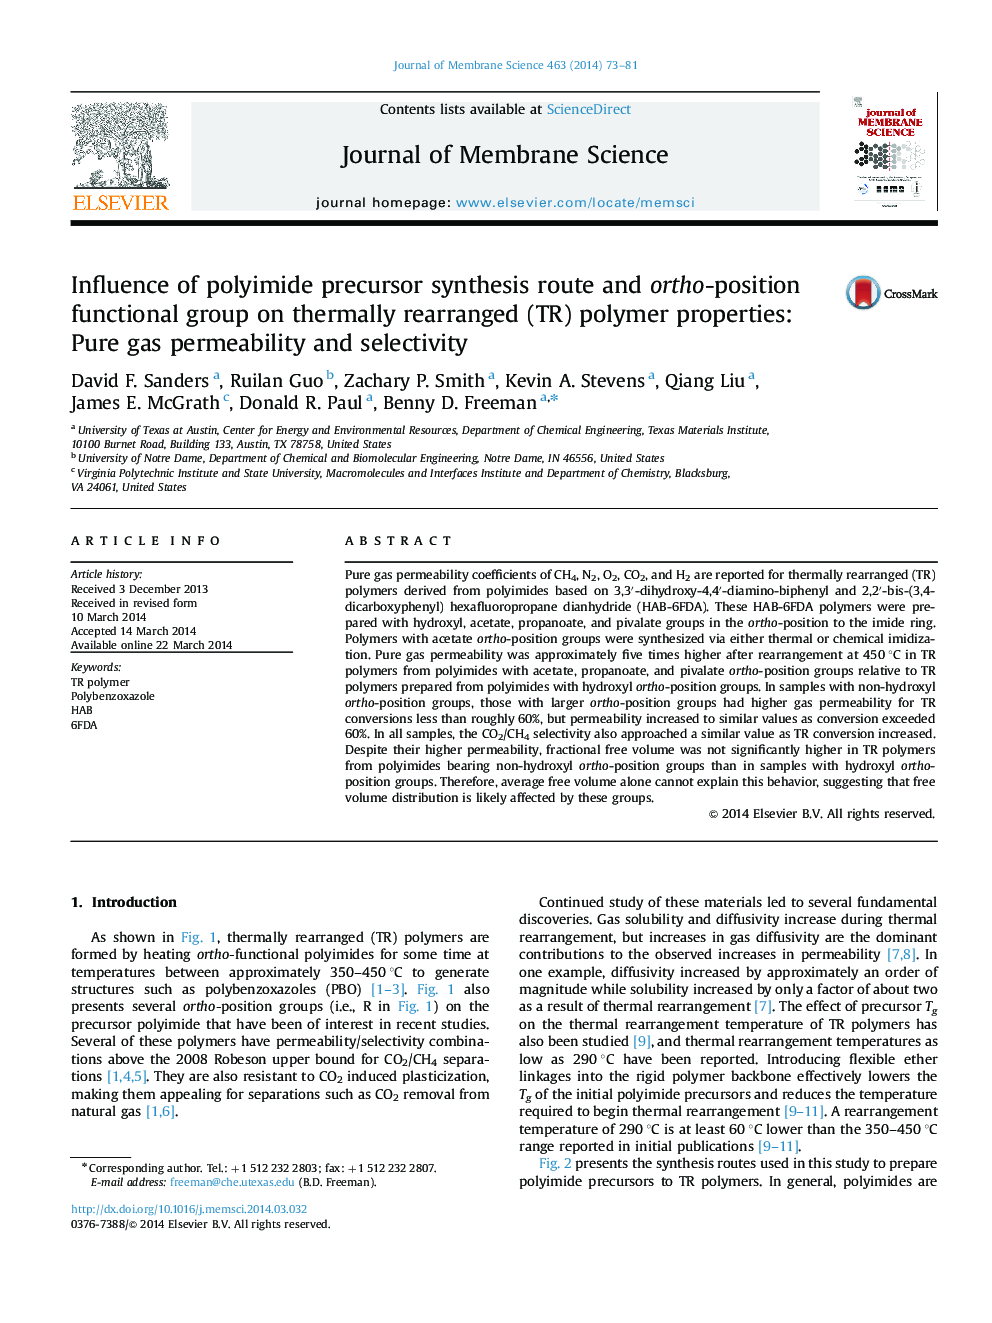 Influence of polyimide precursor synthesis route and ortho-position functional group on thermally rearranged (TR) polymer properties: Pure gas permeability and selectivity